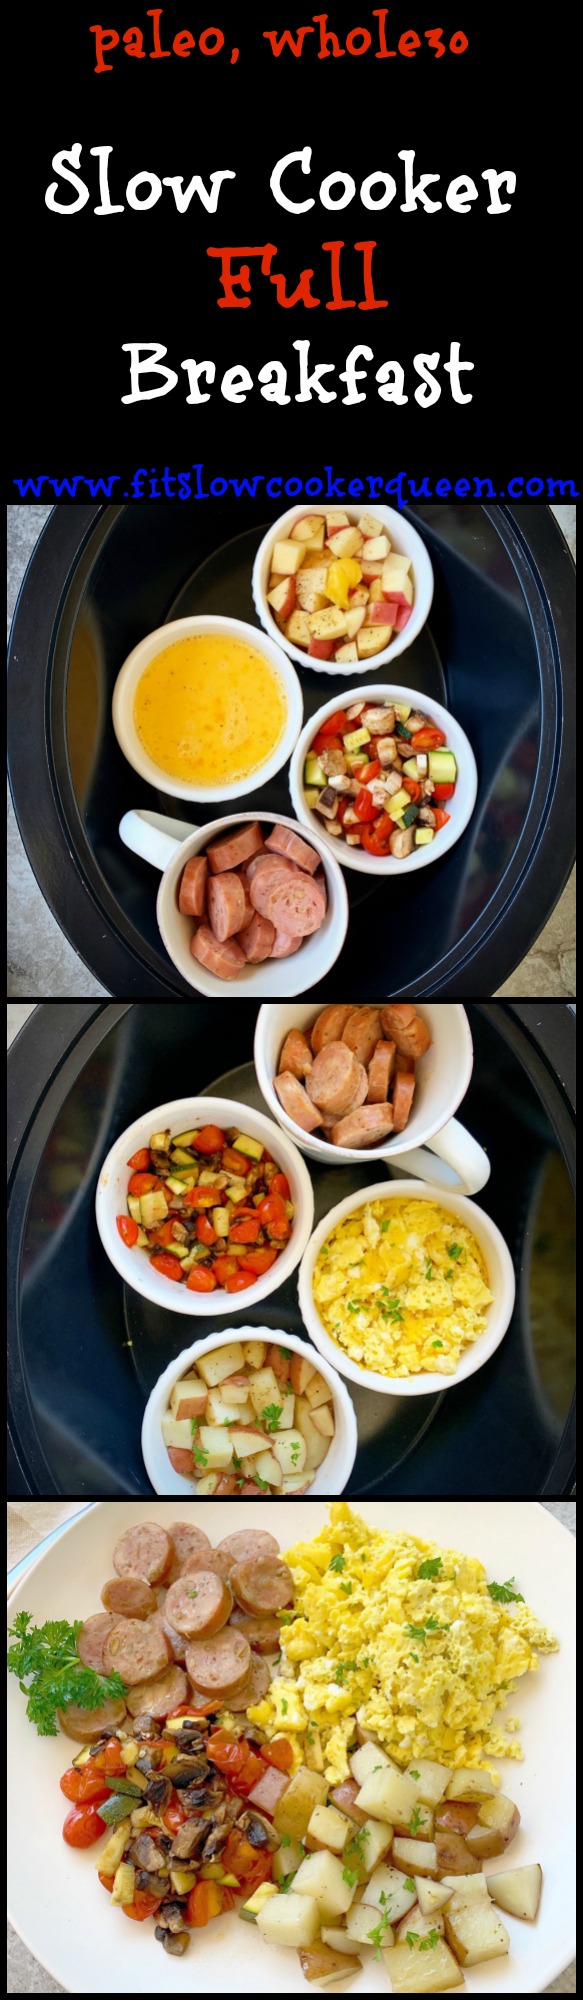 another pinterest pin for Slow Cooker Full Breakfast (Paleo,Whole30) pin2